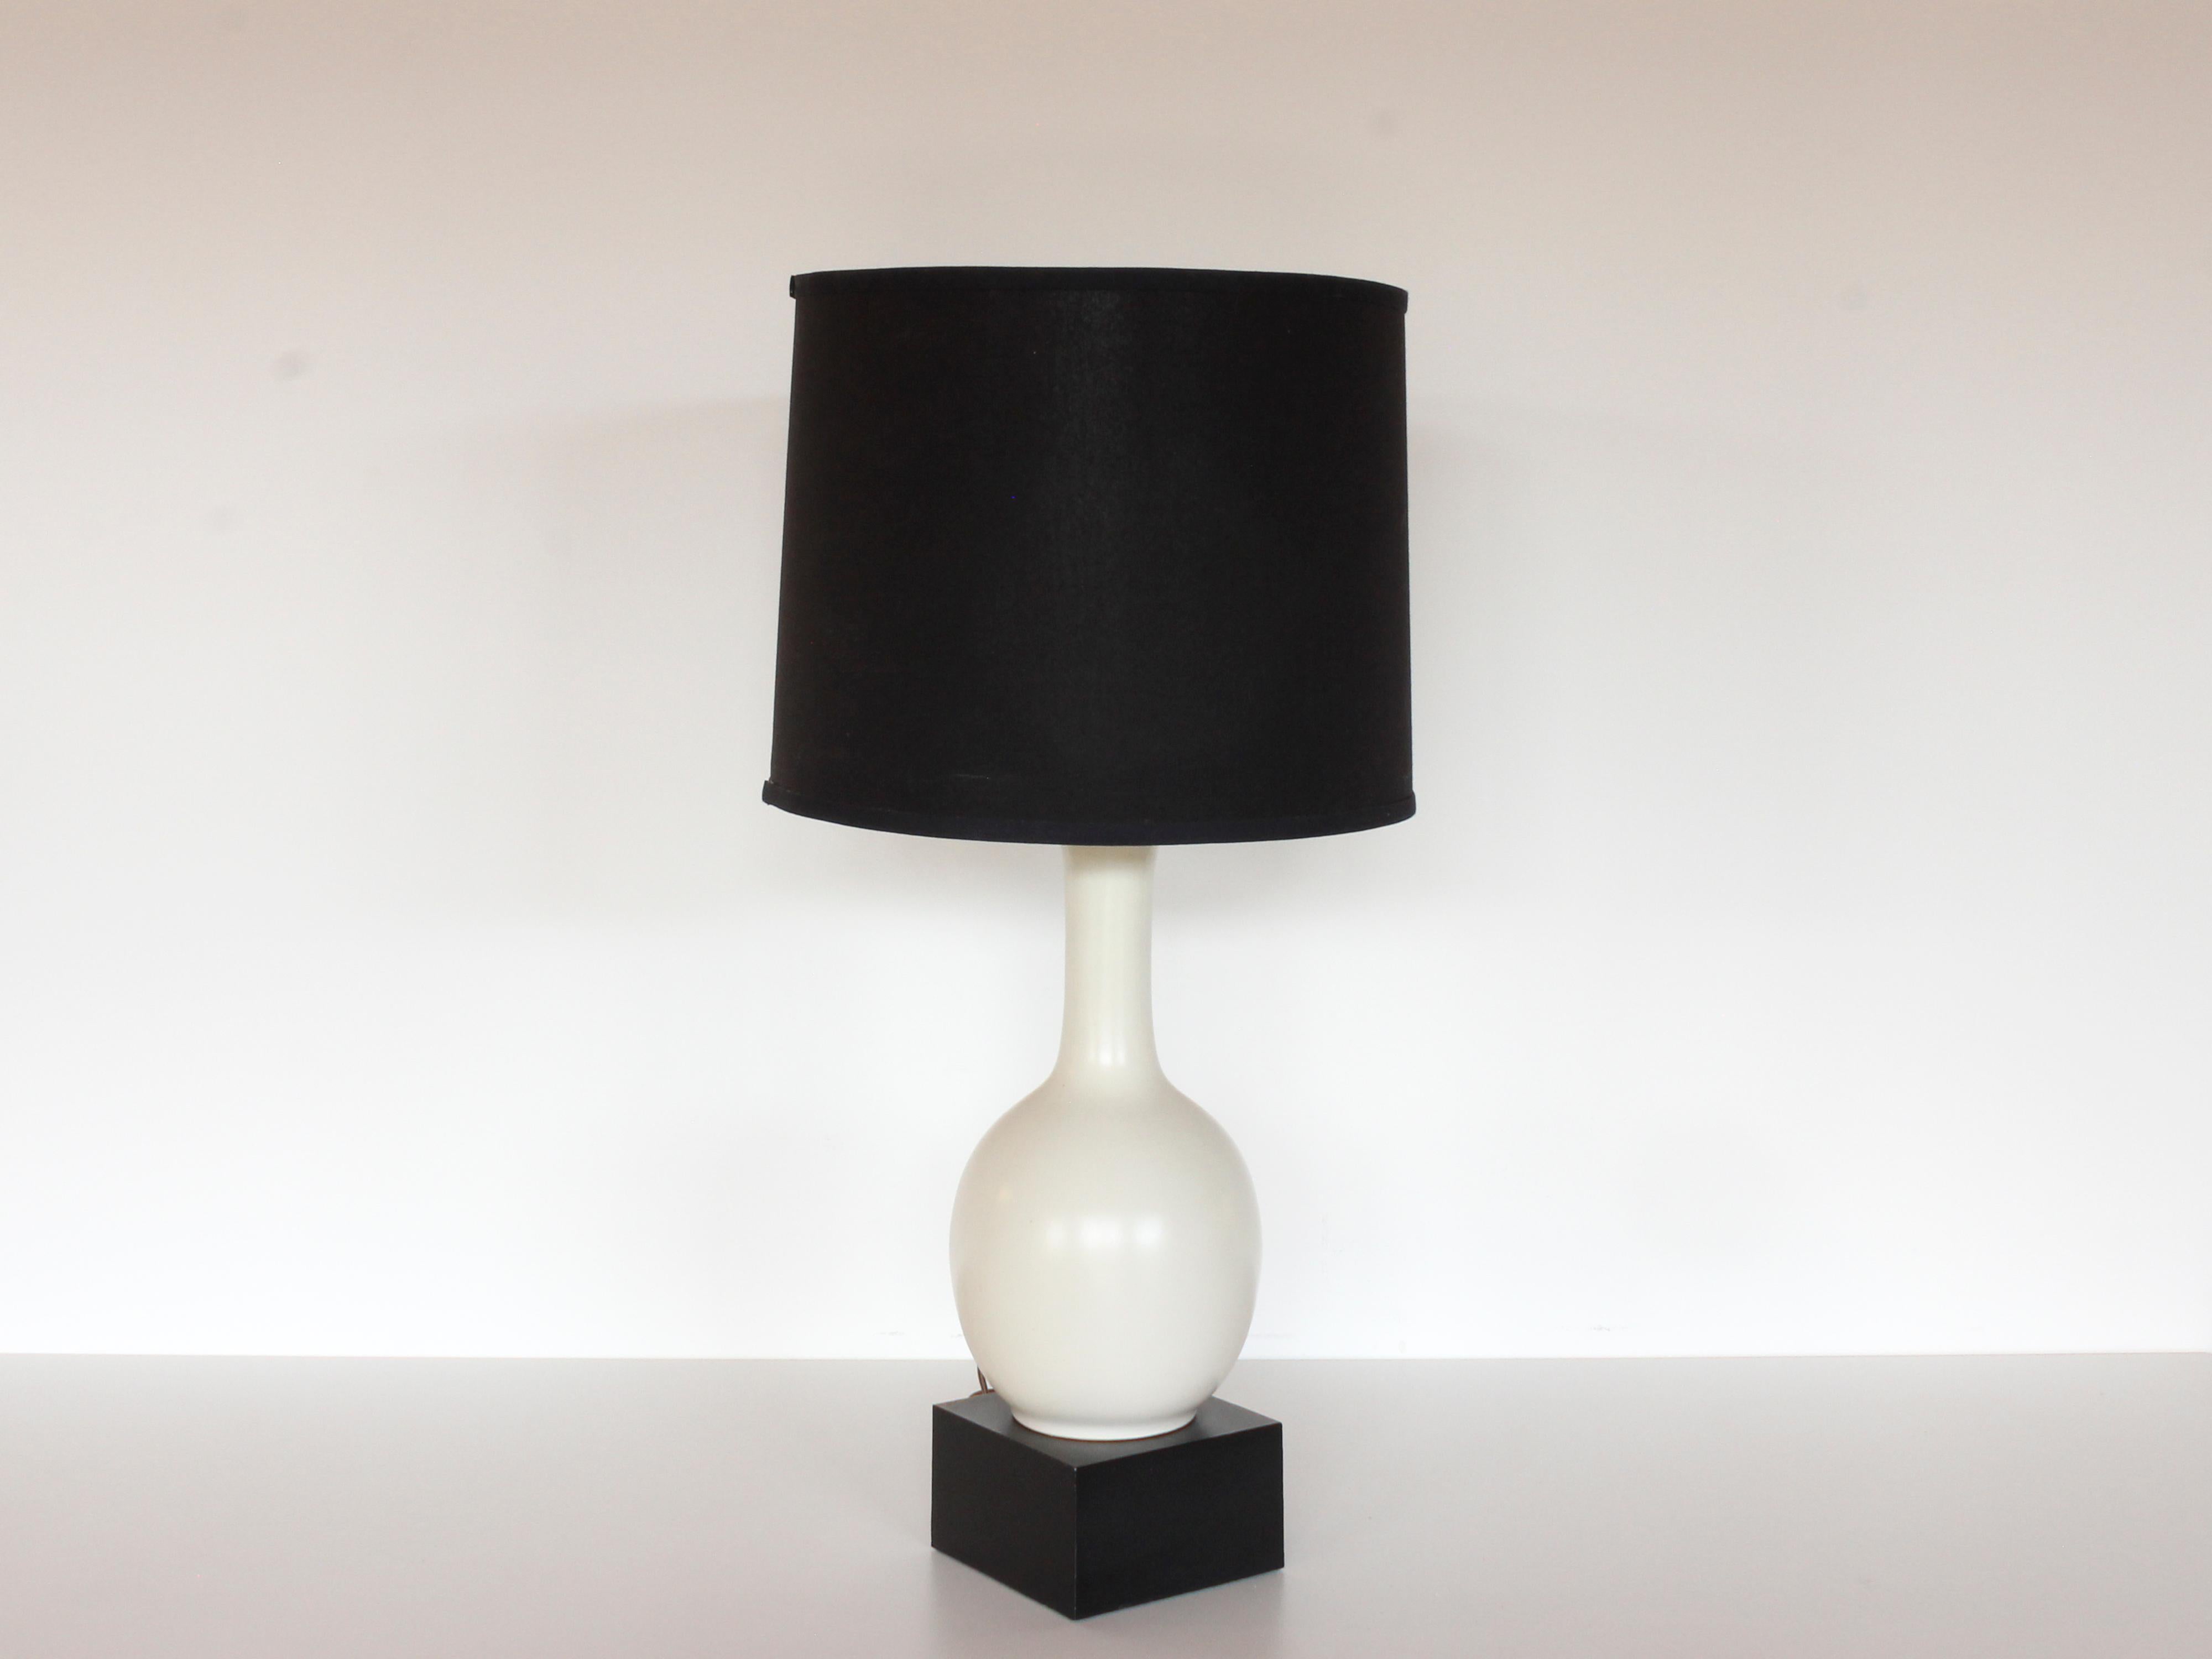 1960s Midcentury European craquelure / crackle white pottery table lamp on black block square base, with black lamp shade. Black base is 6